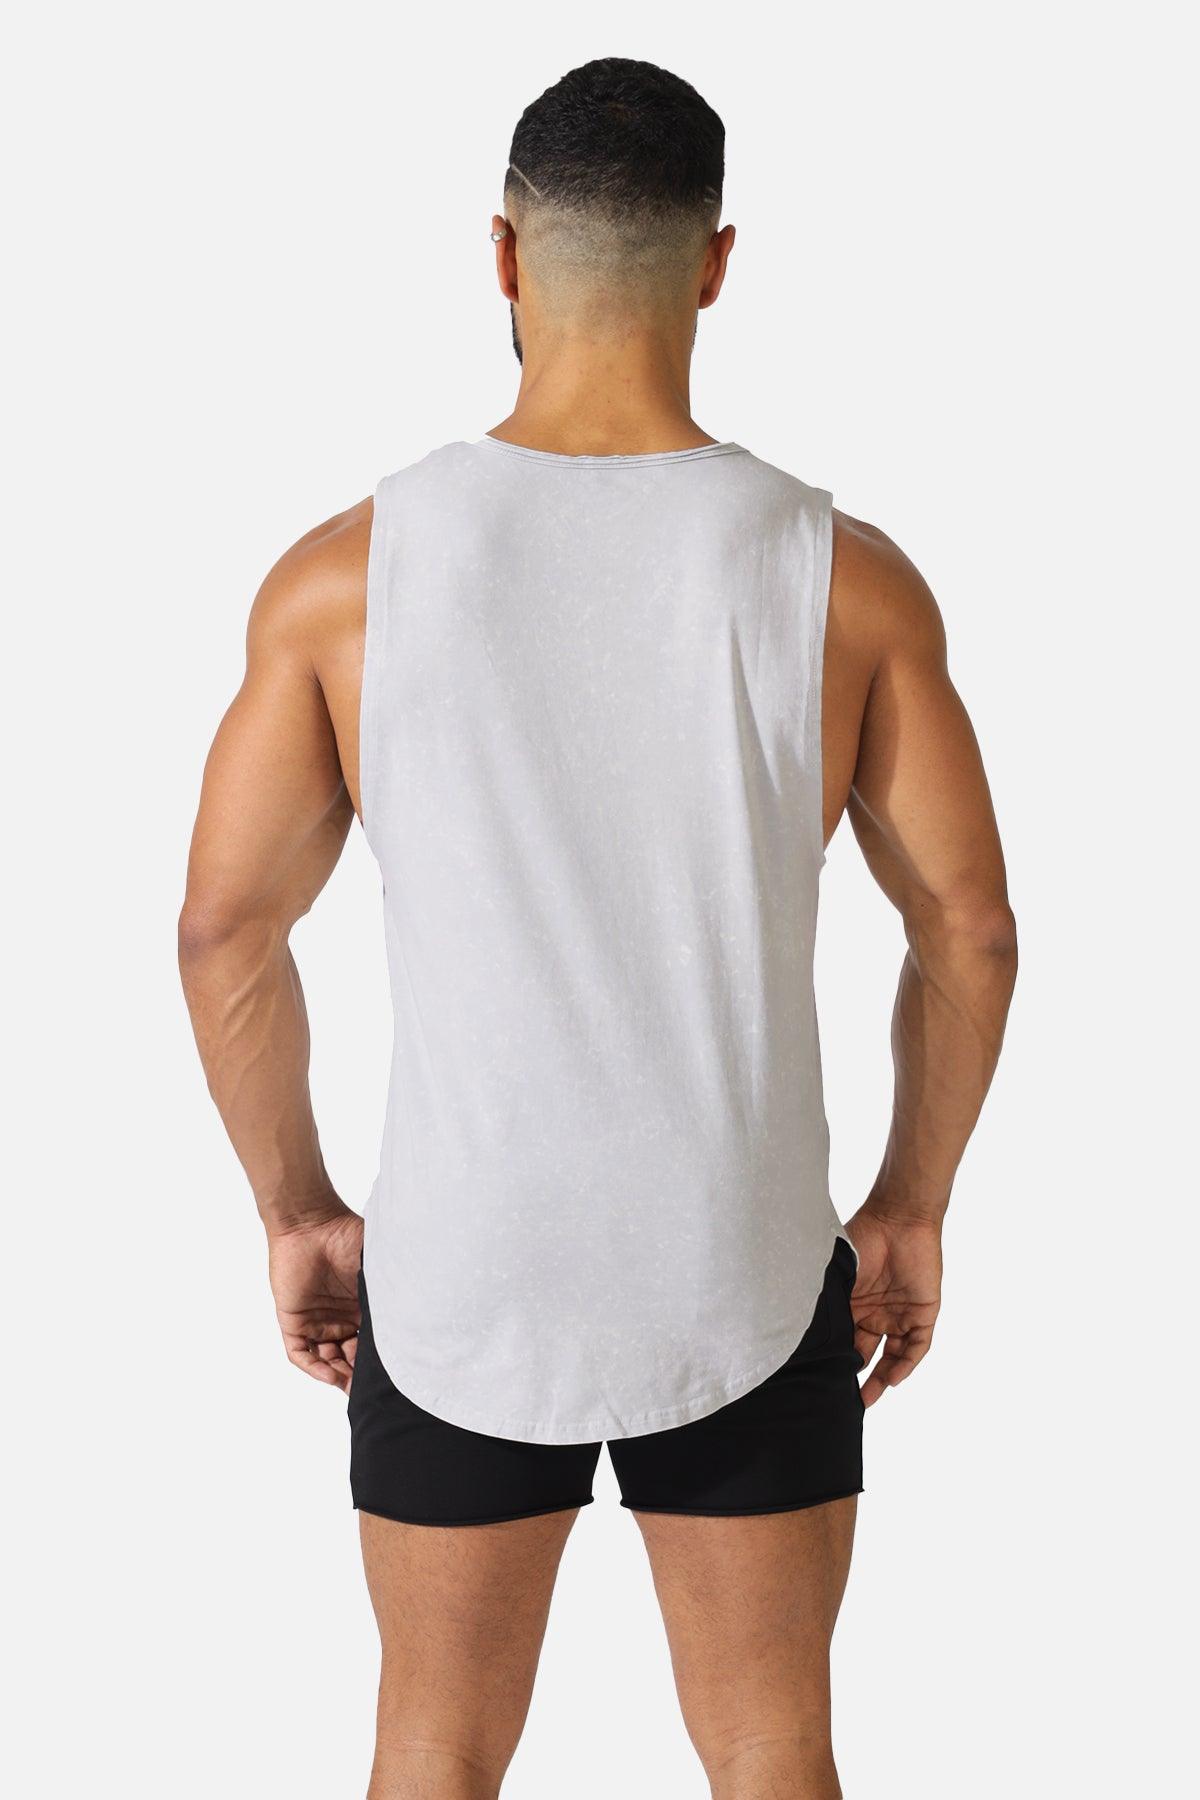 Vintage Washed Muscle Tee - Light Gray - Jed North